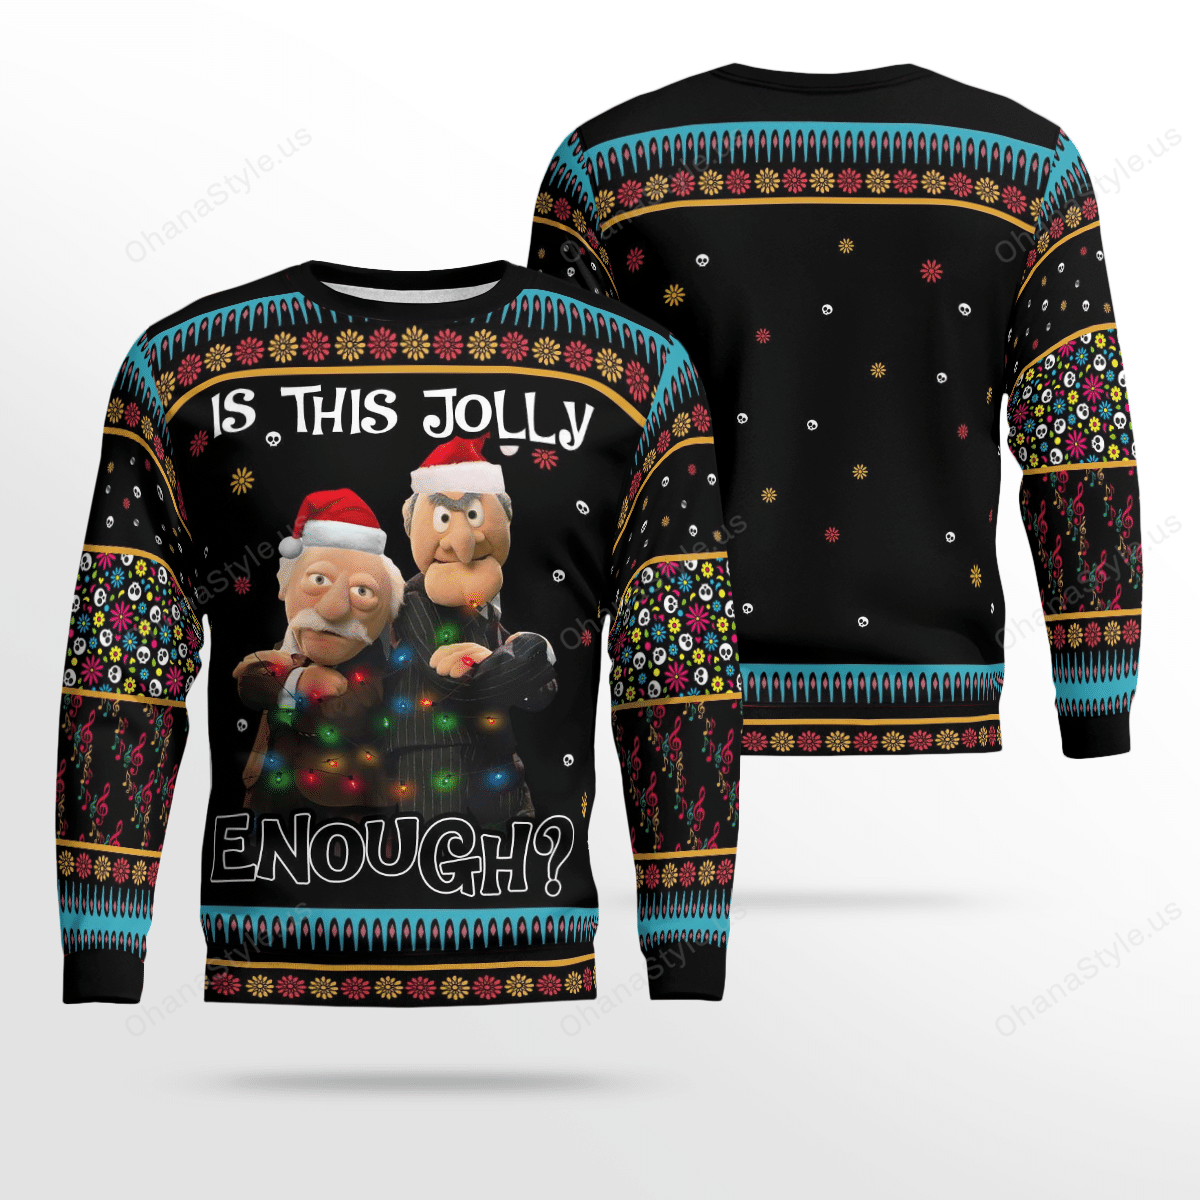 This Christmas you need to wear this sweater